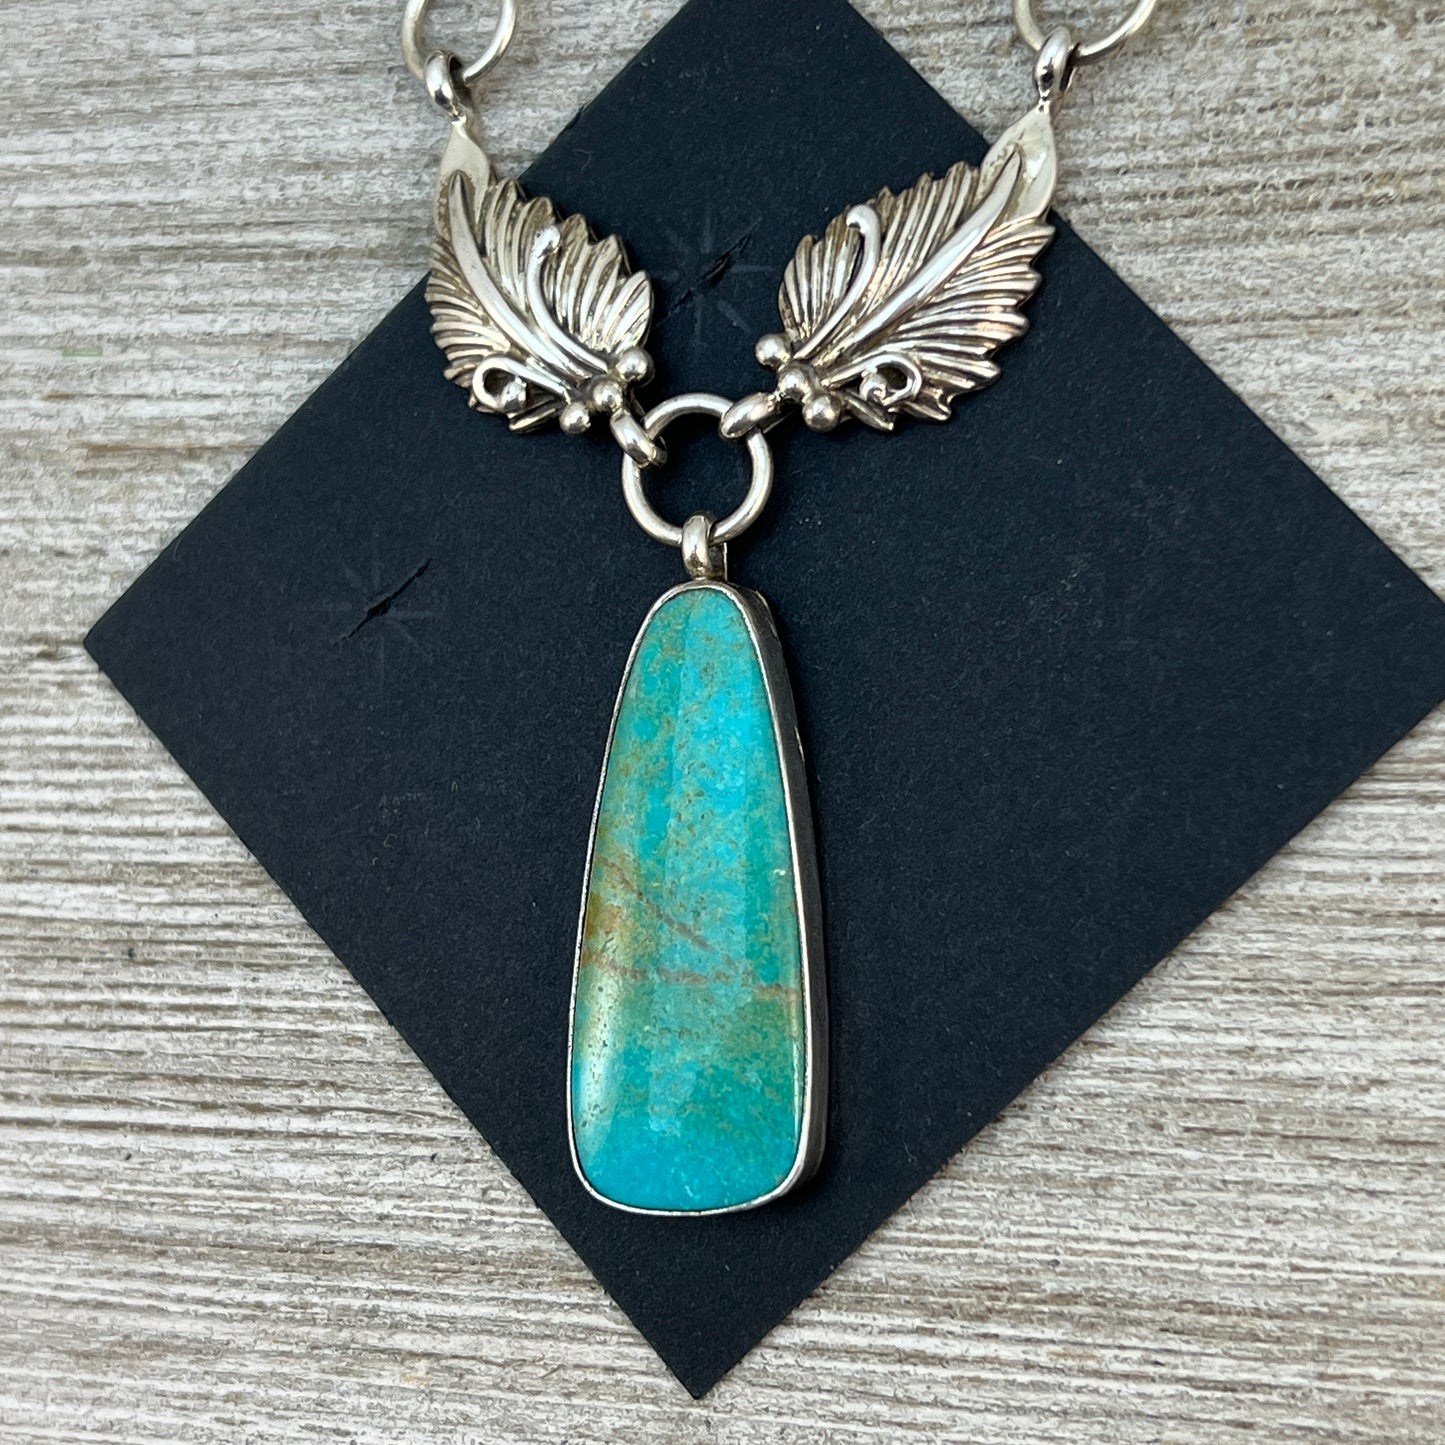 Kingman Turquoise Necklace #3 with Drop Pendant, Real Turquoise, Boho Choker, sterling silver